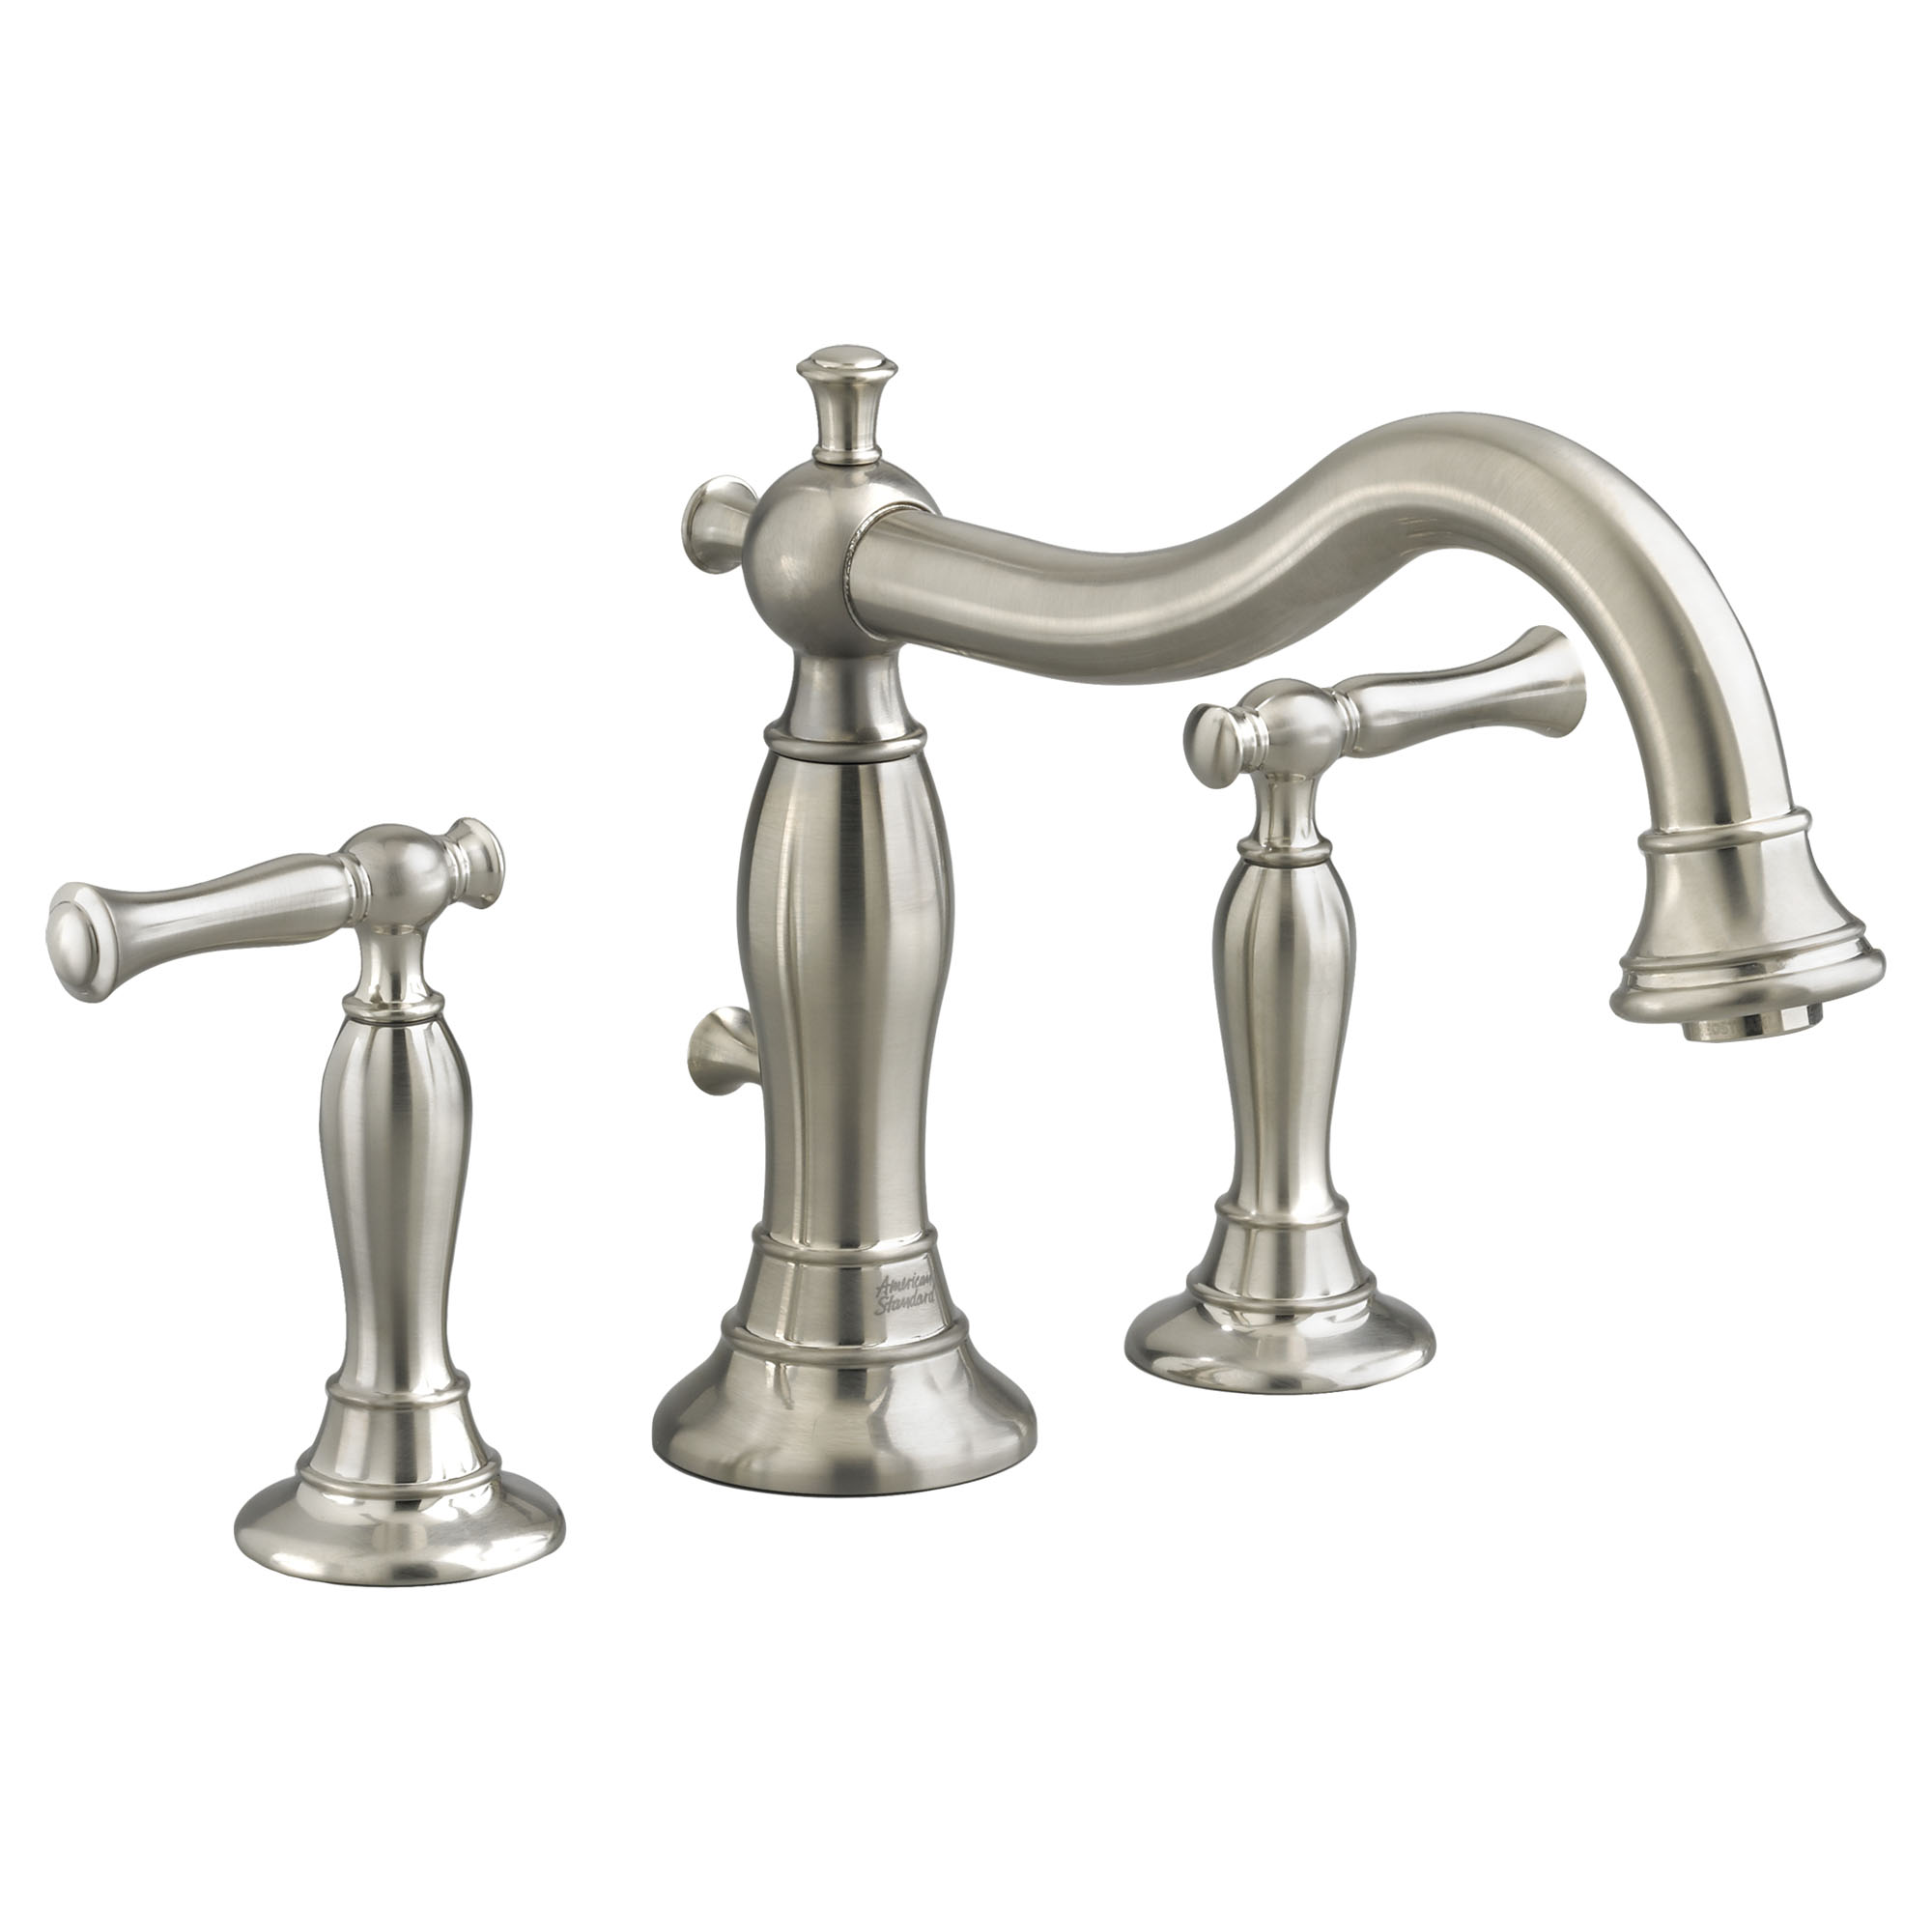 Quentin™ Bathtub Faucet With Lever Handles for Flash™ Rough-In Valve